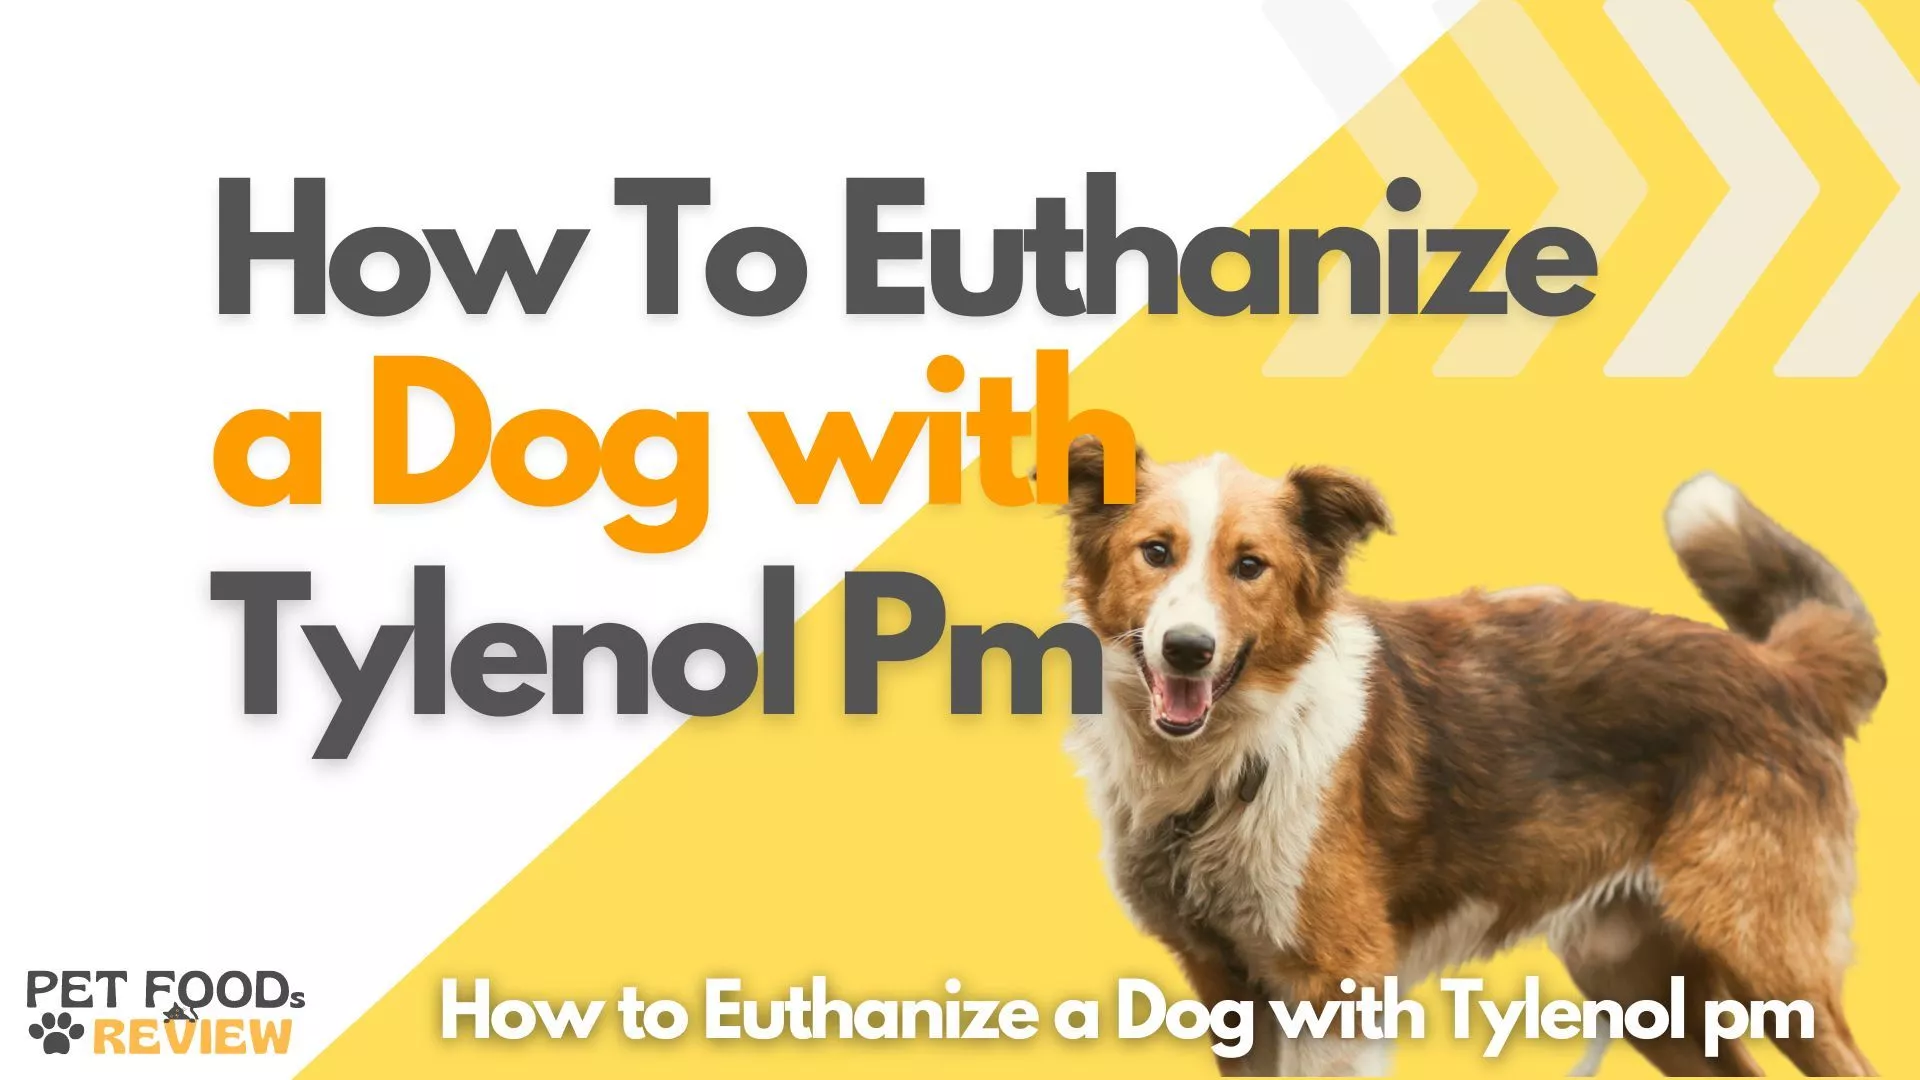 How to Euthanize a Dog with Tylenol pm